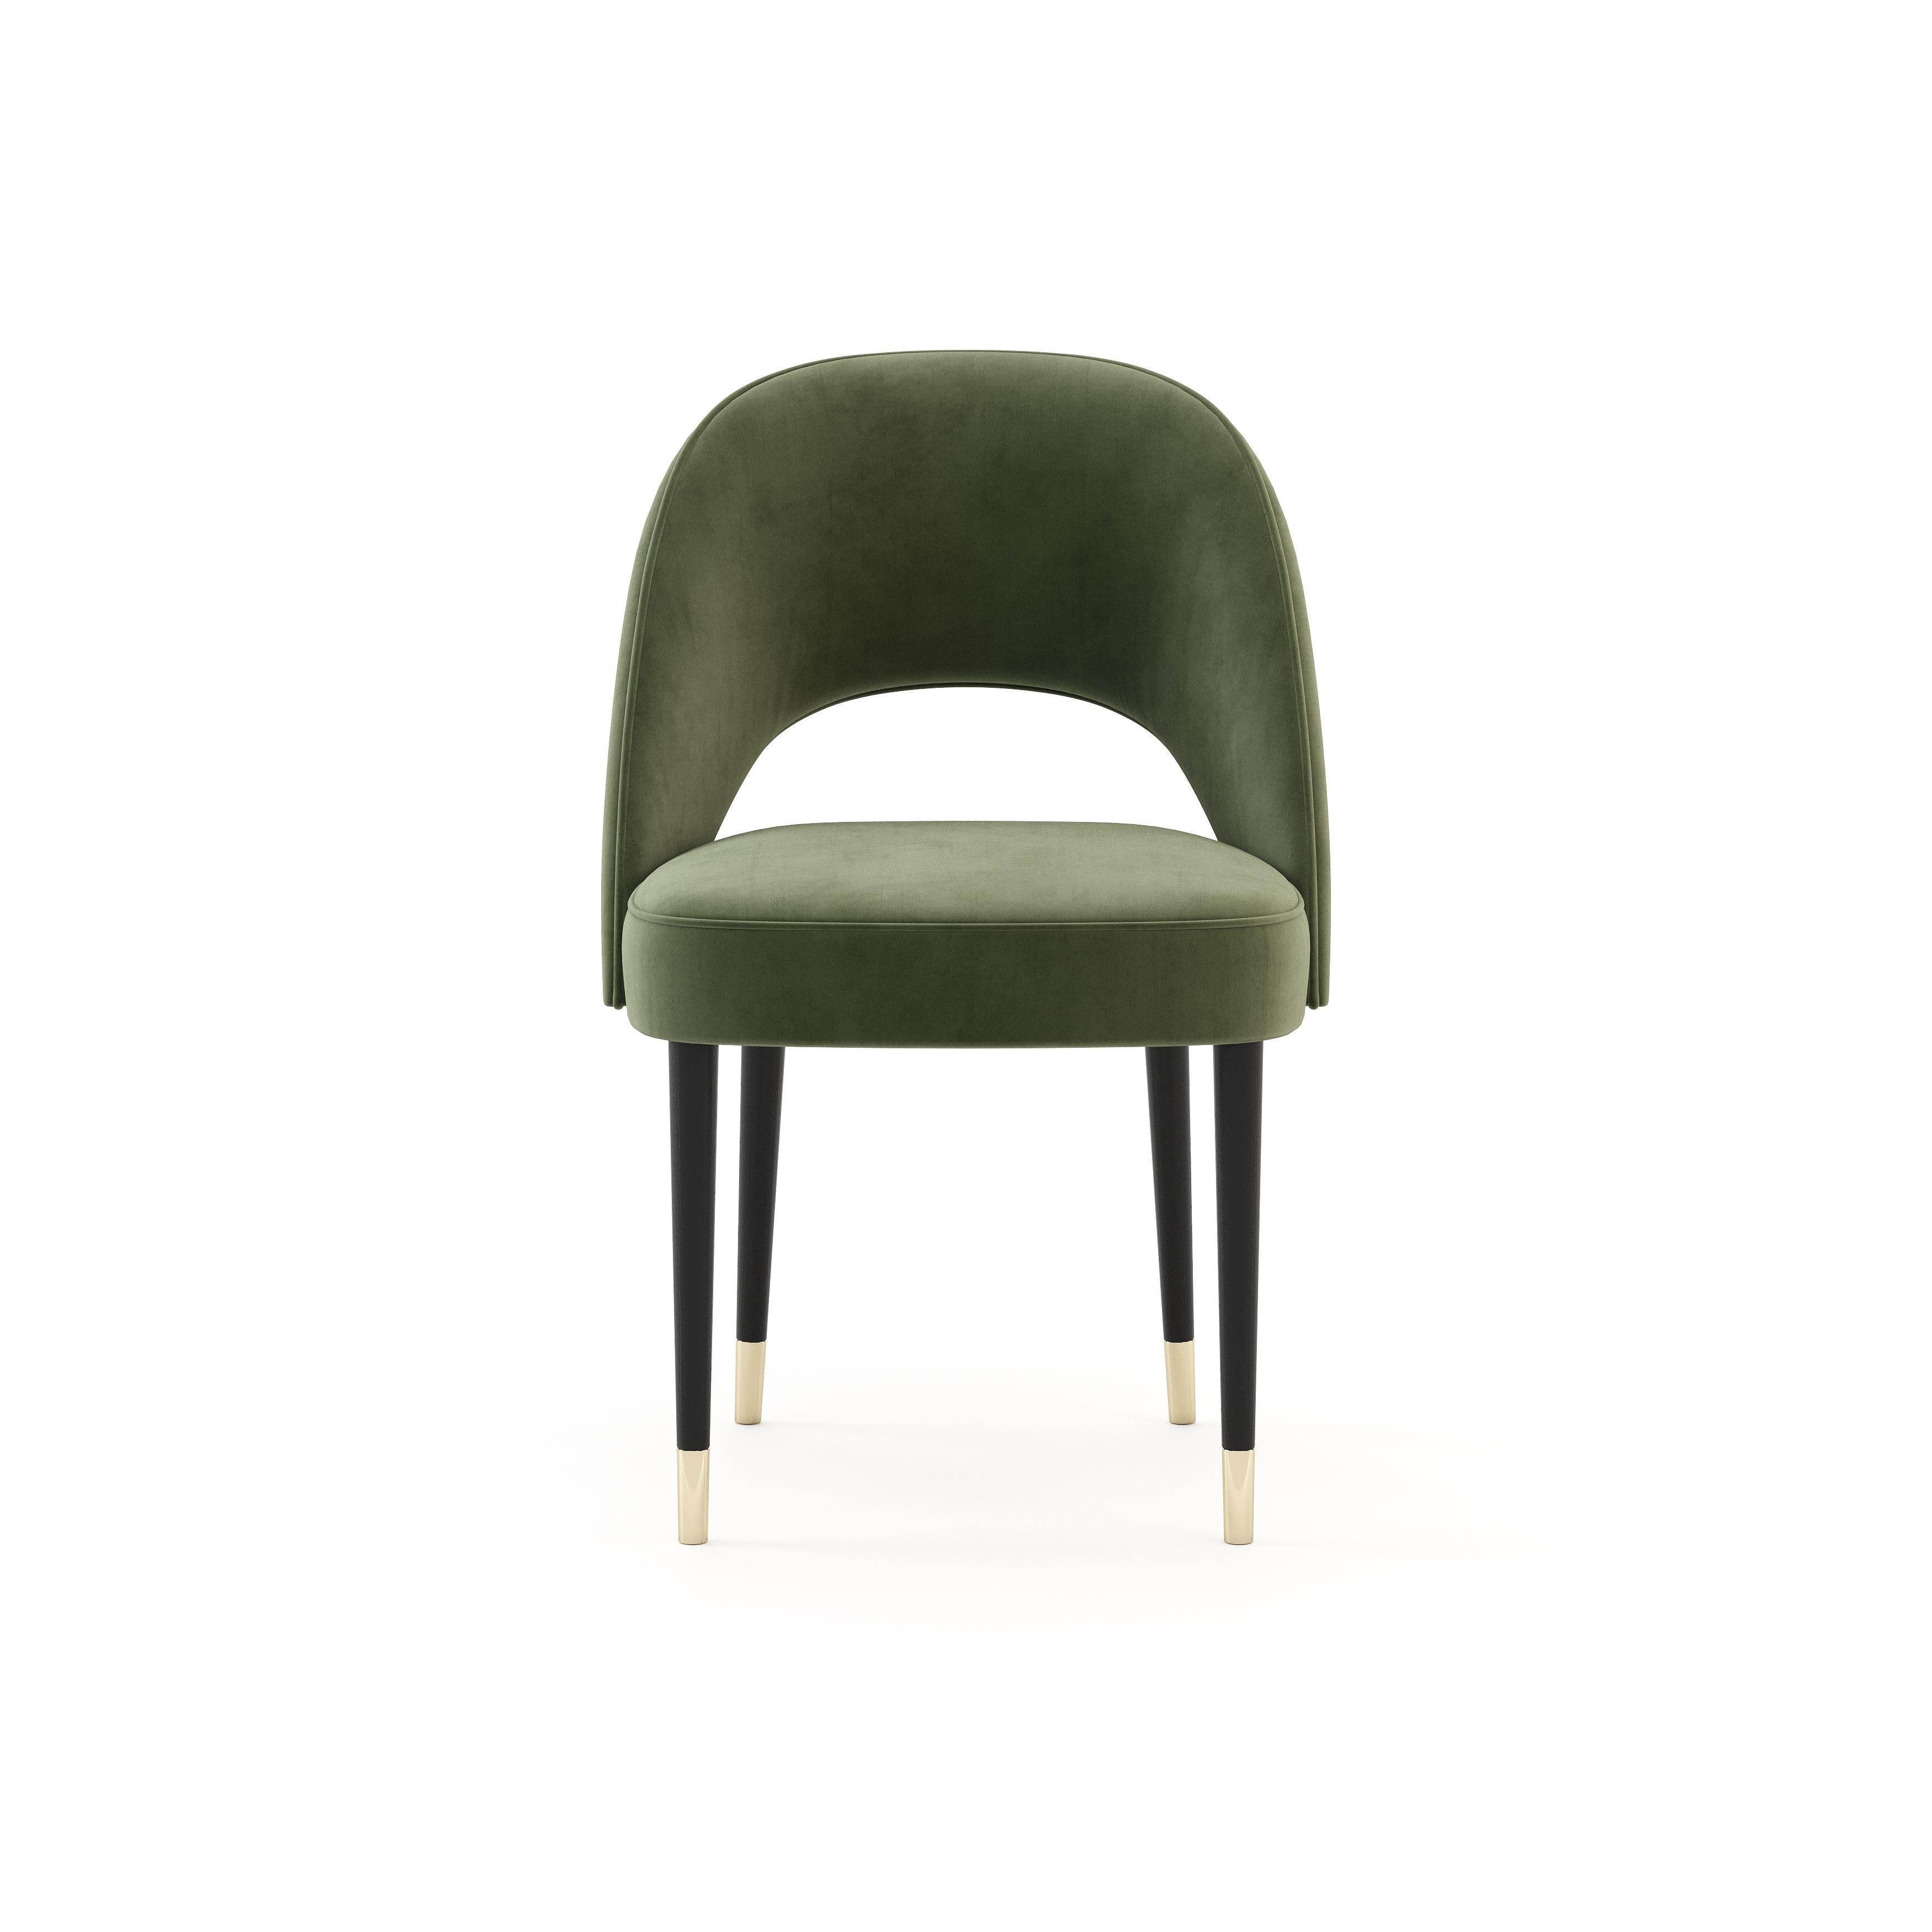 Amour chair re-interprets the landscape of furniture in which comfort is also couture. The bold open curved back of this dining chair contrasts with the simplicity of the seat. Amour curvy design is the perfect way to liven up your dining room. It